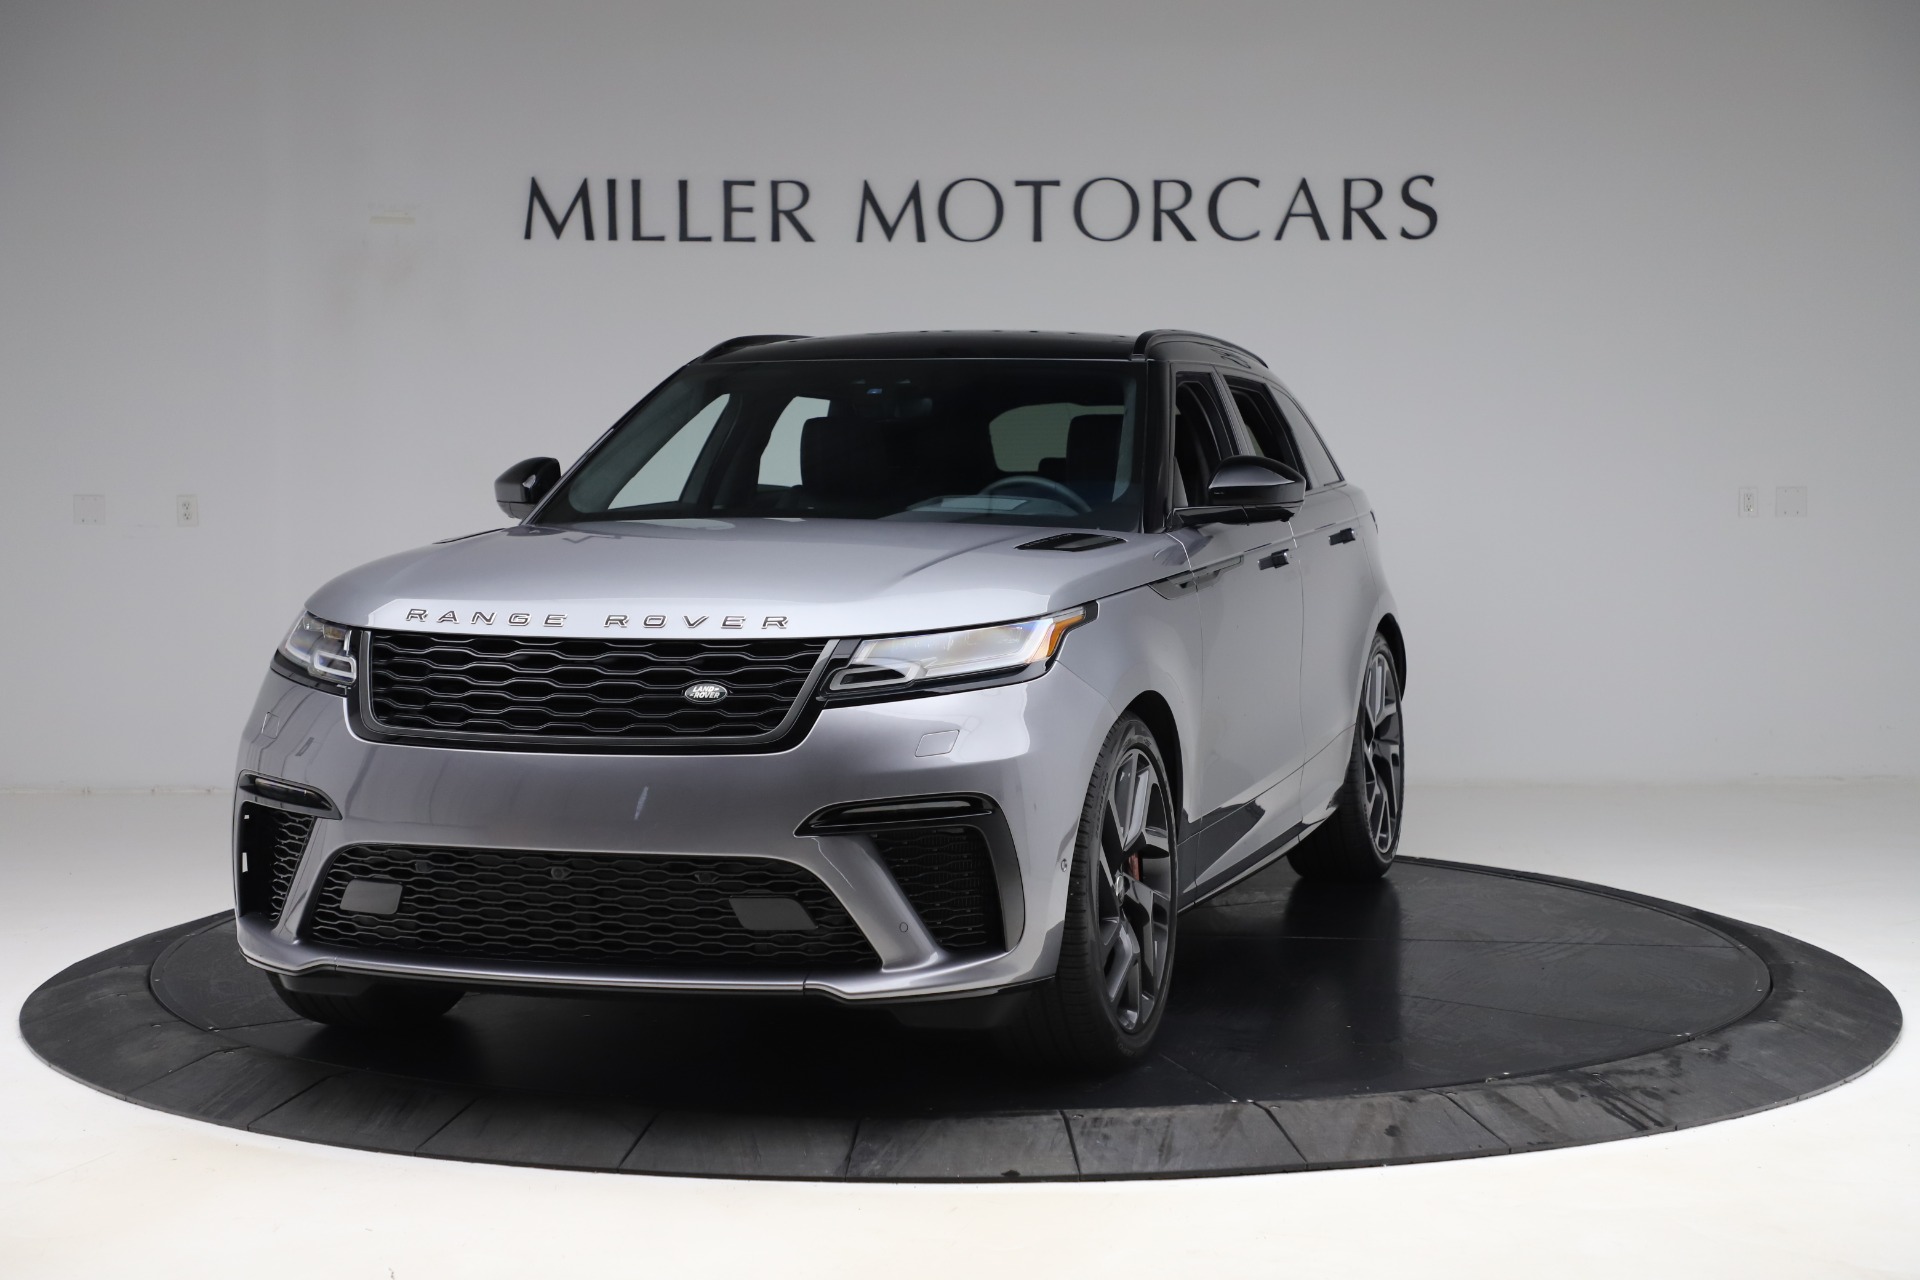 Used 2020 Land Rover Range Rover Velar SVAutobiography Dynamic Edition for sale Sold at Alfa Romeo of Greenwich in Greenwich CT 06830 1